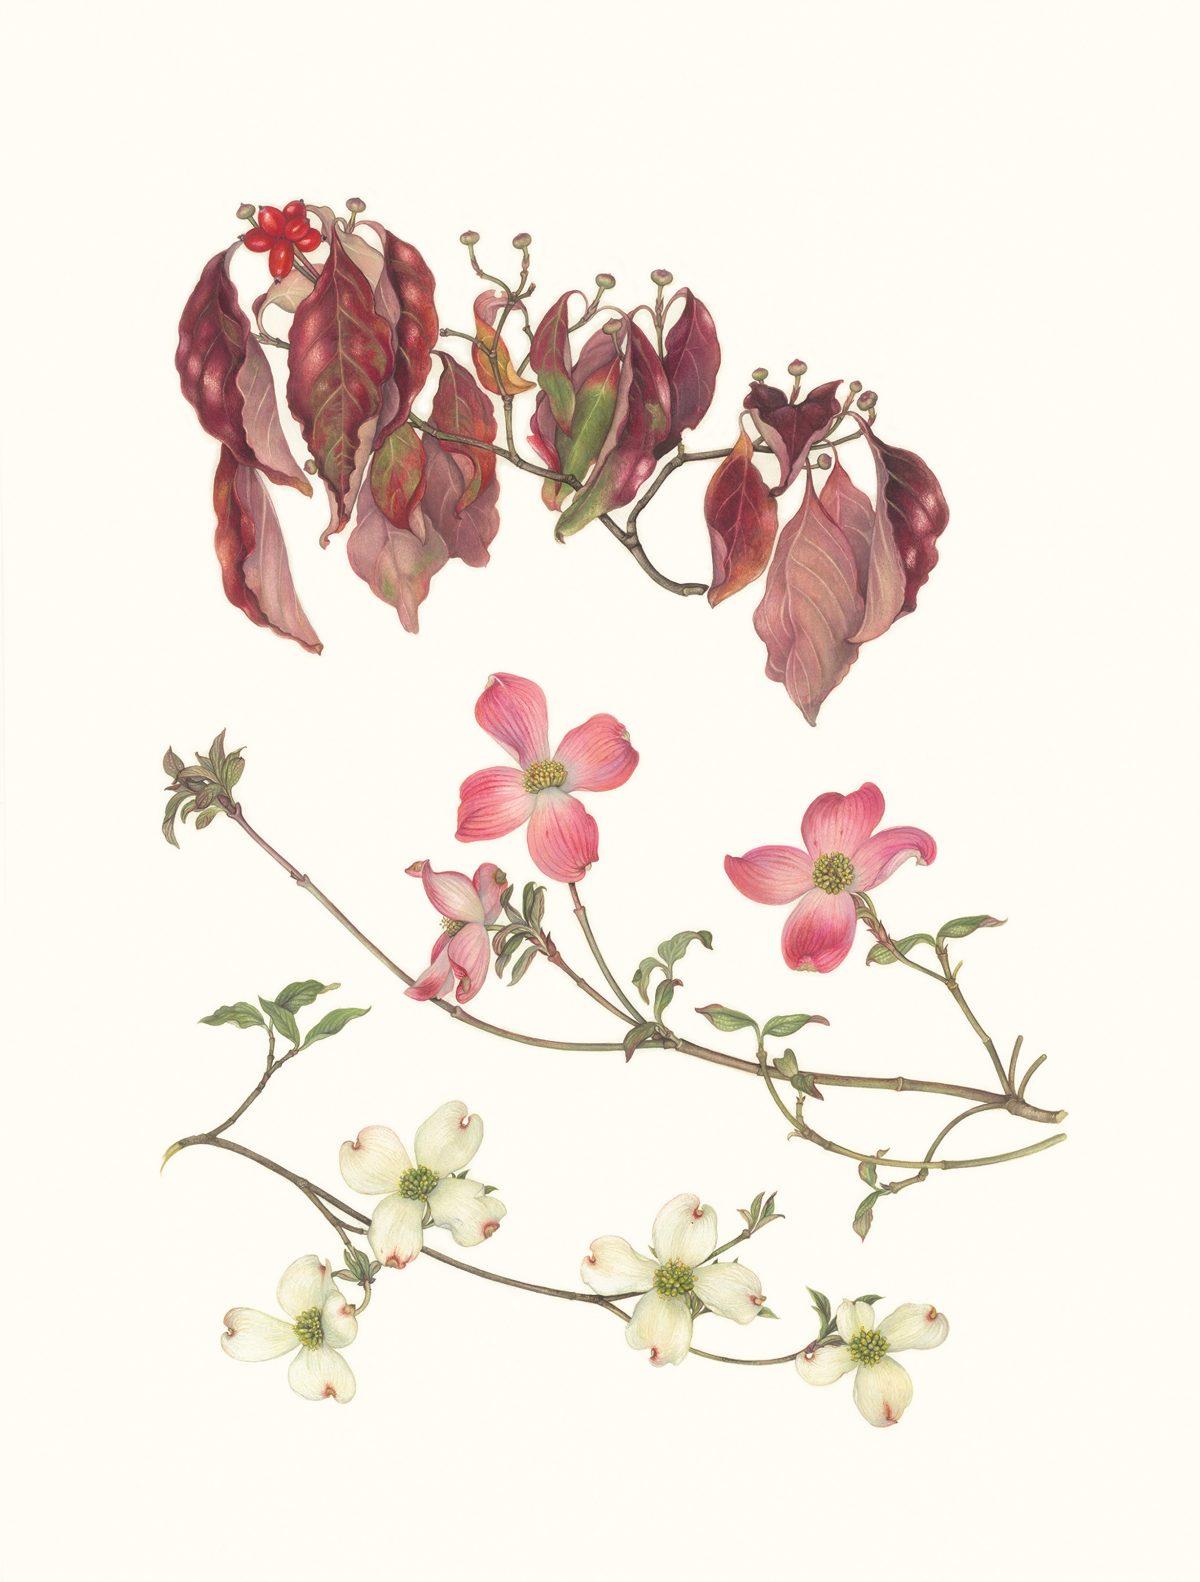 "Flowering Dogwood (Cornus florida) Fall and Spring," by Margaret Farr. Watercolor on paper, 23 inches by 17 inches. (Margaret Farr)